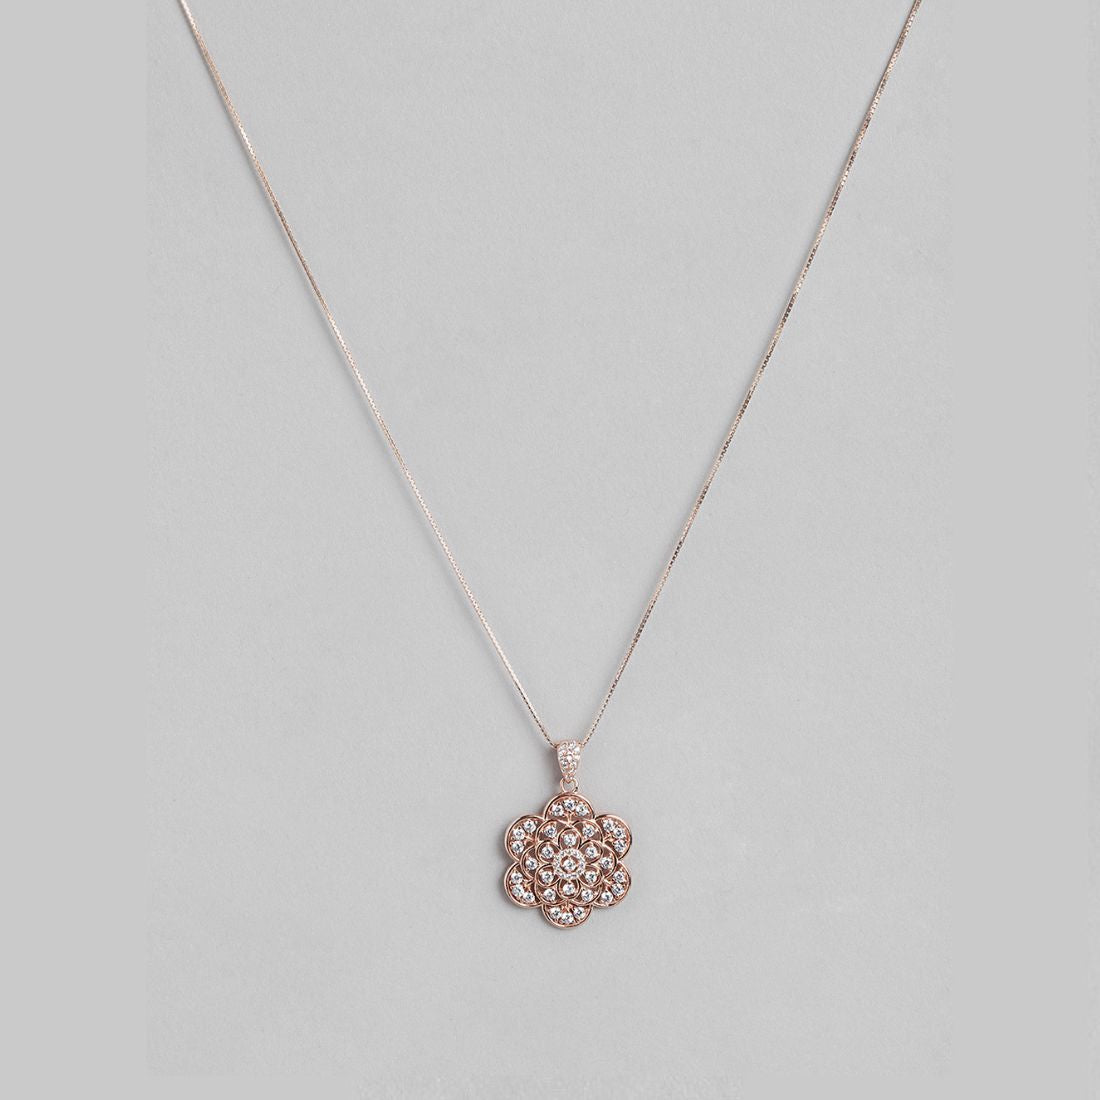 Radiant Charm 925 Sterling Silver Rose Gold Plated CZ Pendant